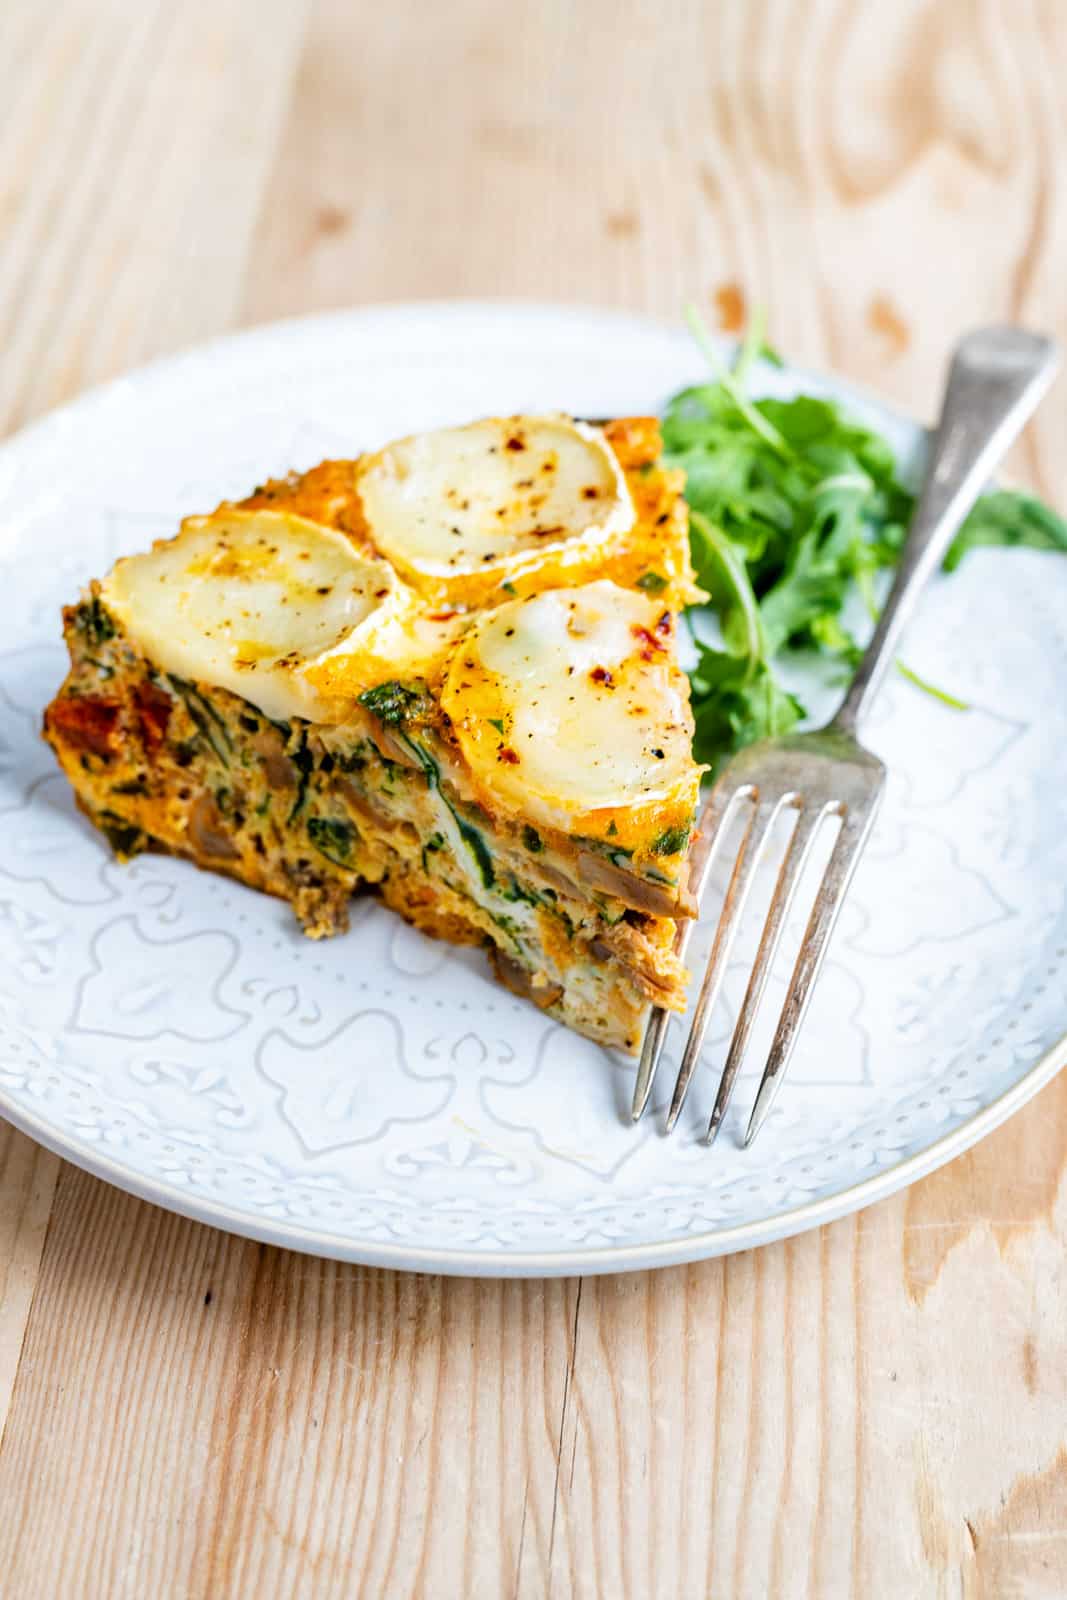 slice of Keto crustless quiche on a plate